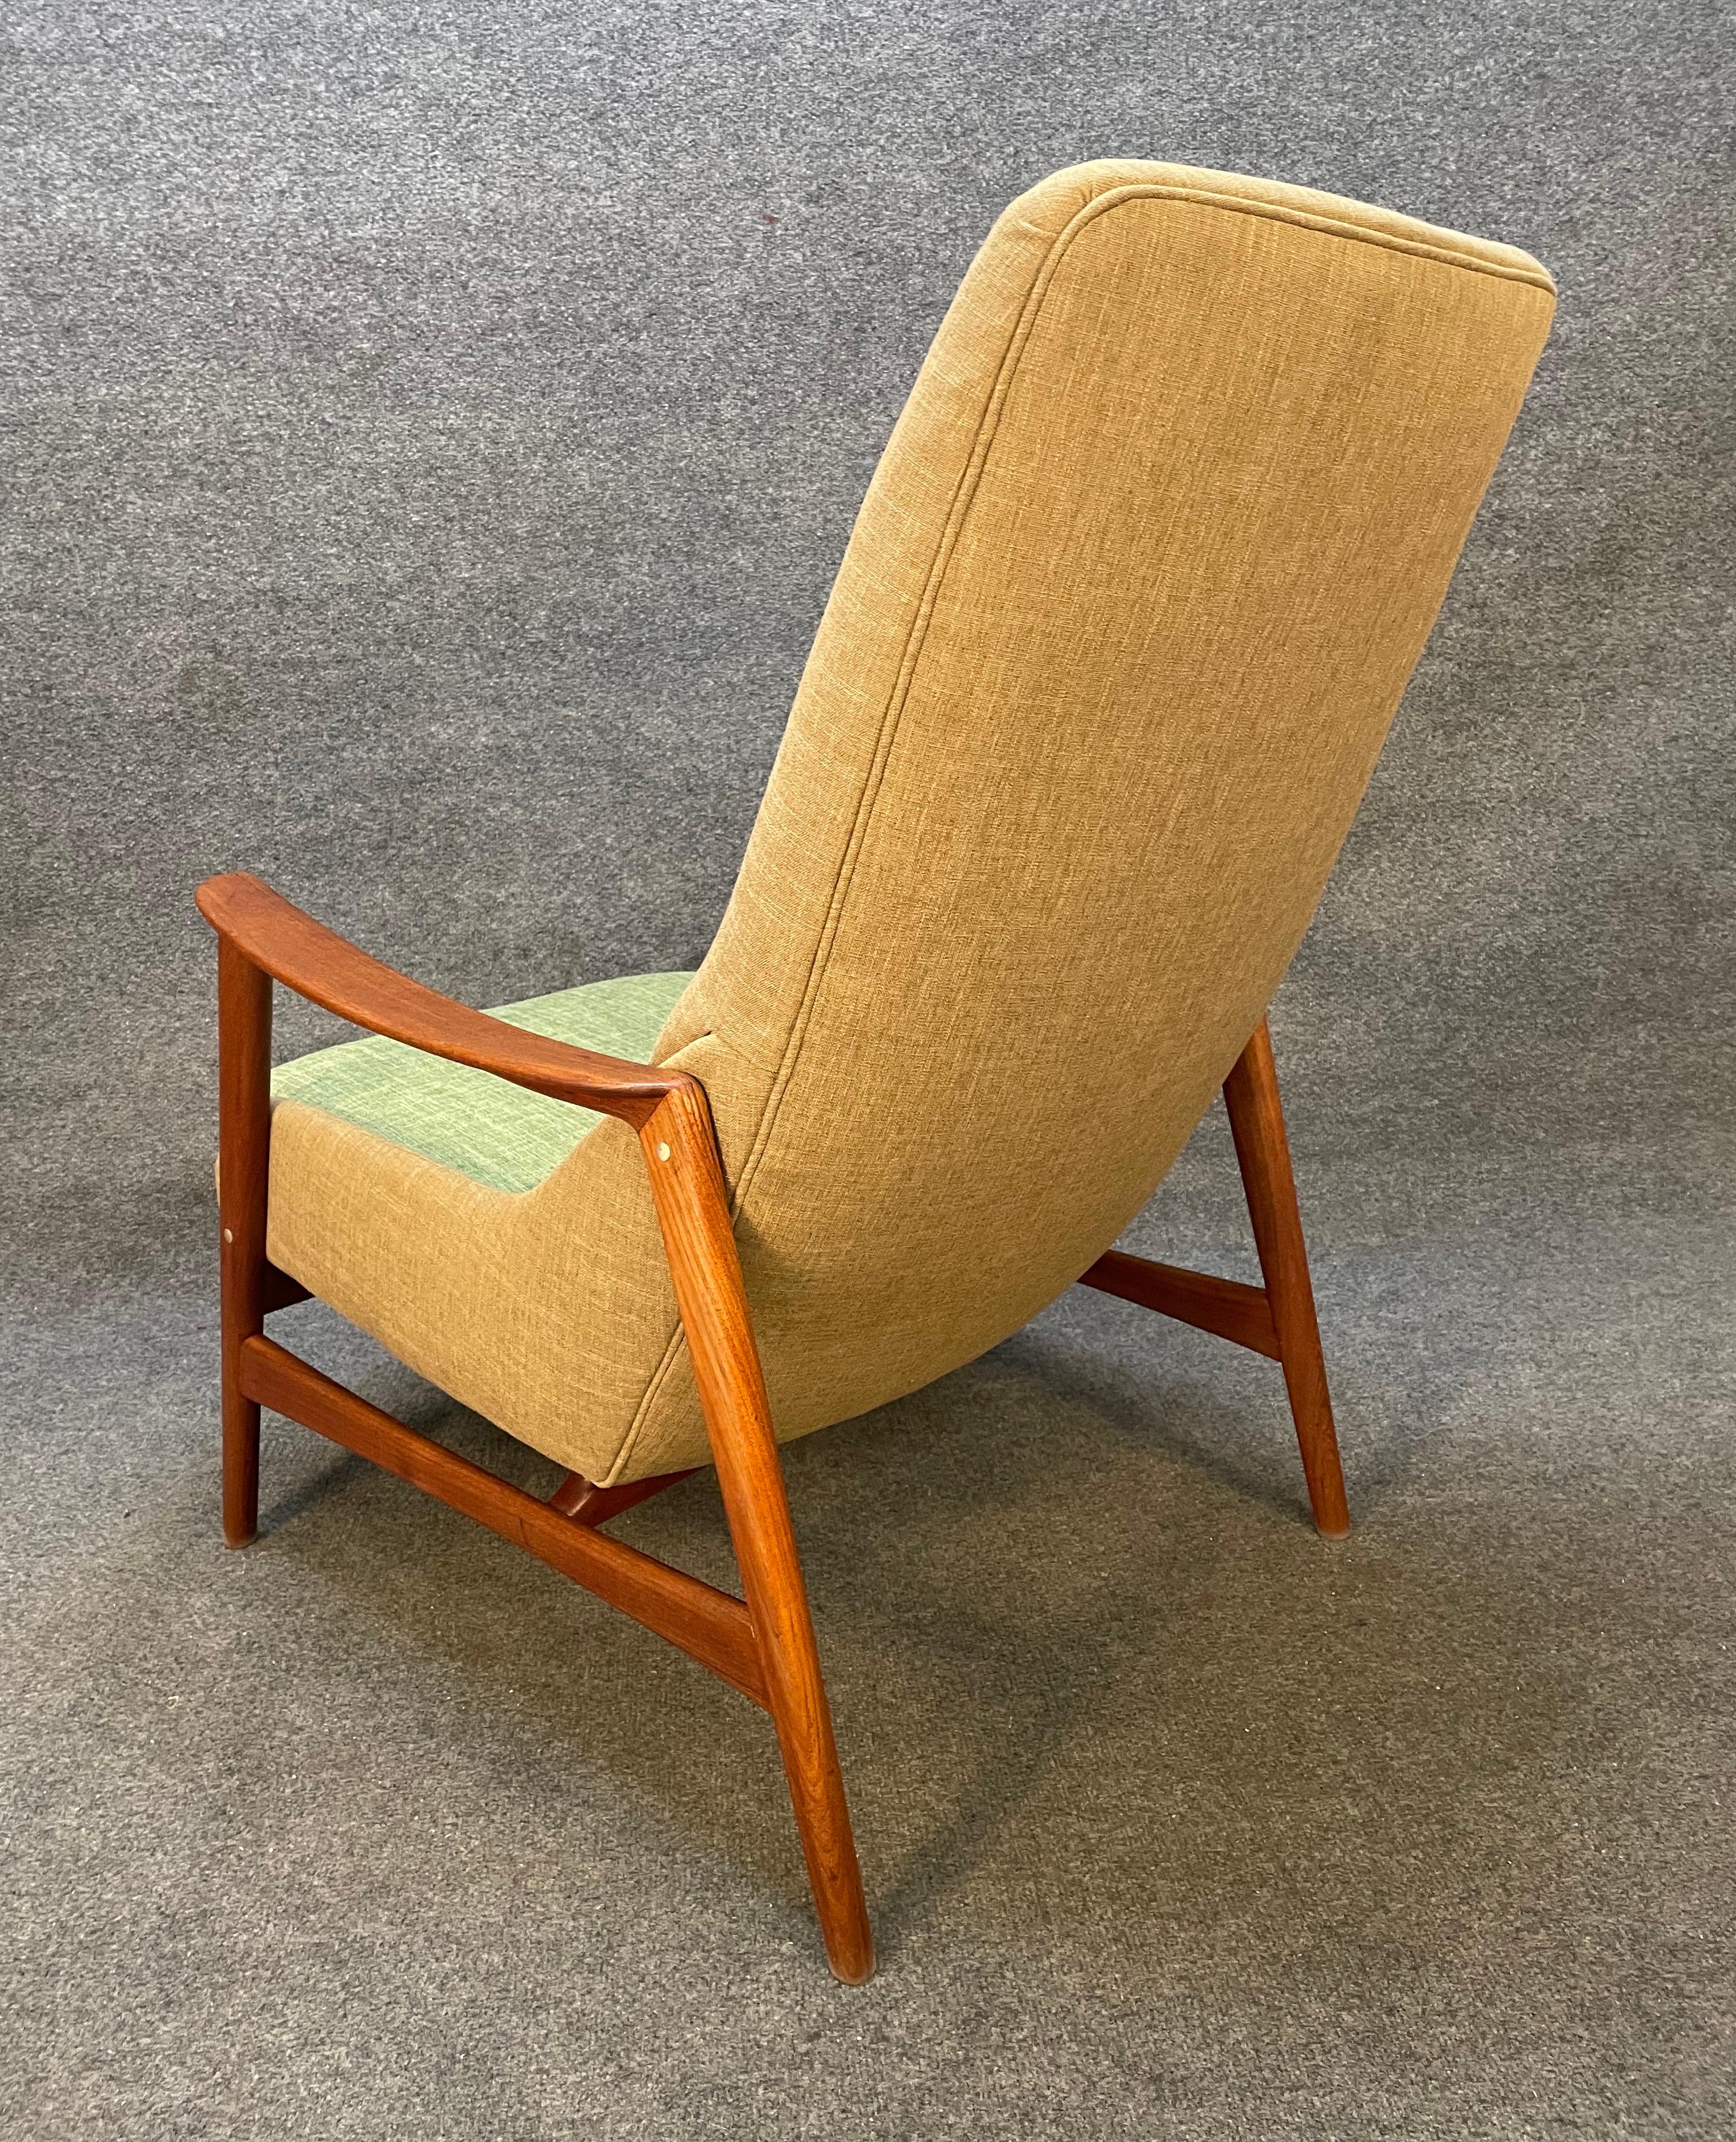 Vintage Danish Mid Century Modern Teak Lounge Chair by Dux of Sweden In Good Condition For Sale In San Marcos, CA